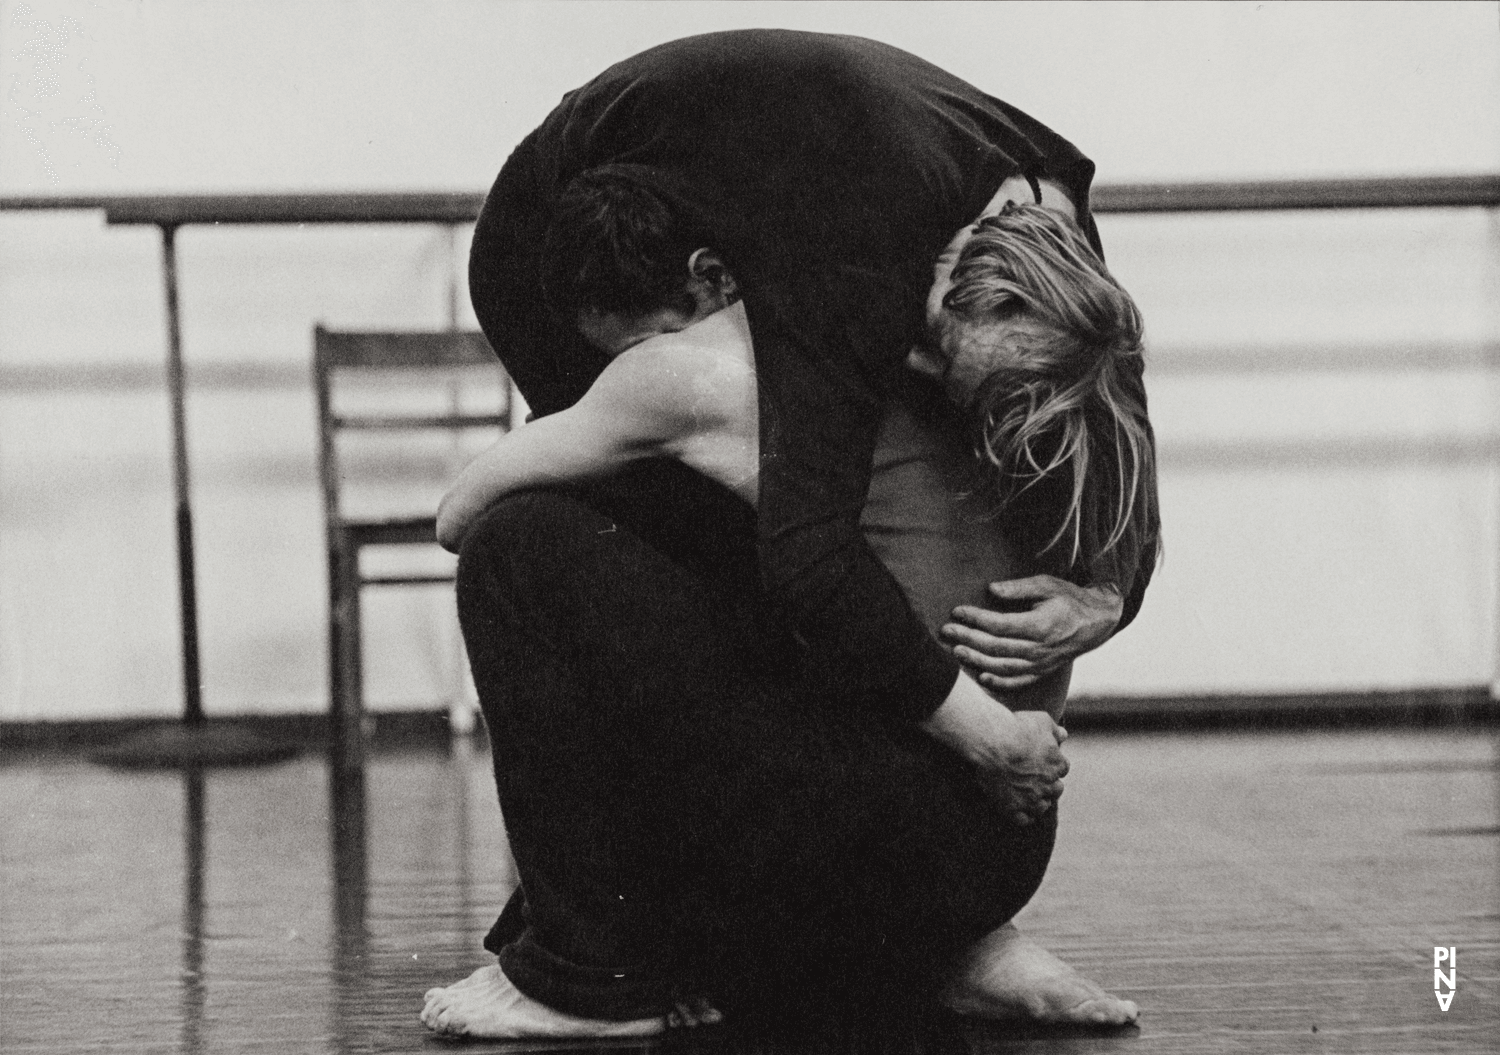 Dominique Mercy and Jan Minařík in “Café Müller” by Pina Bausch